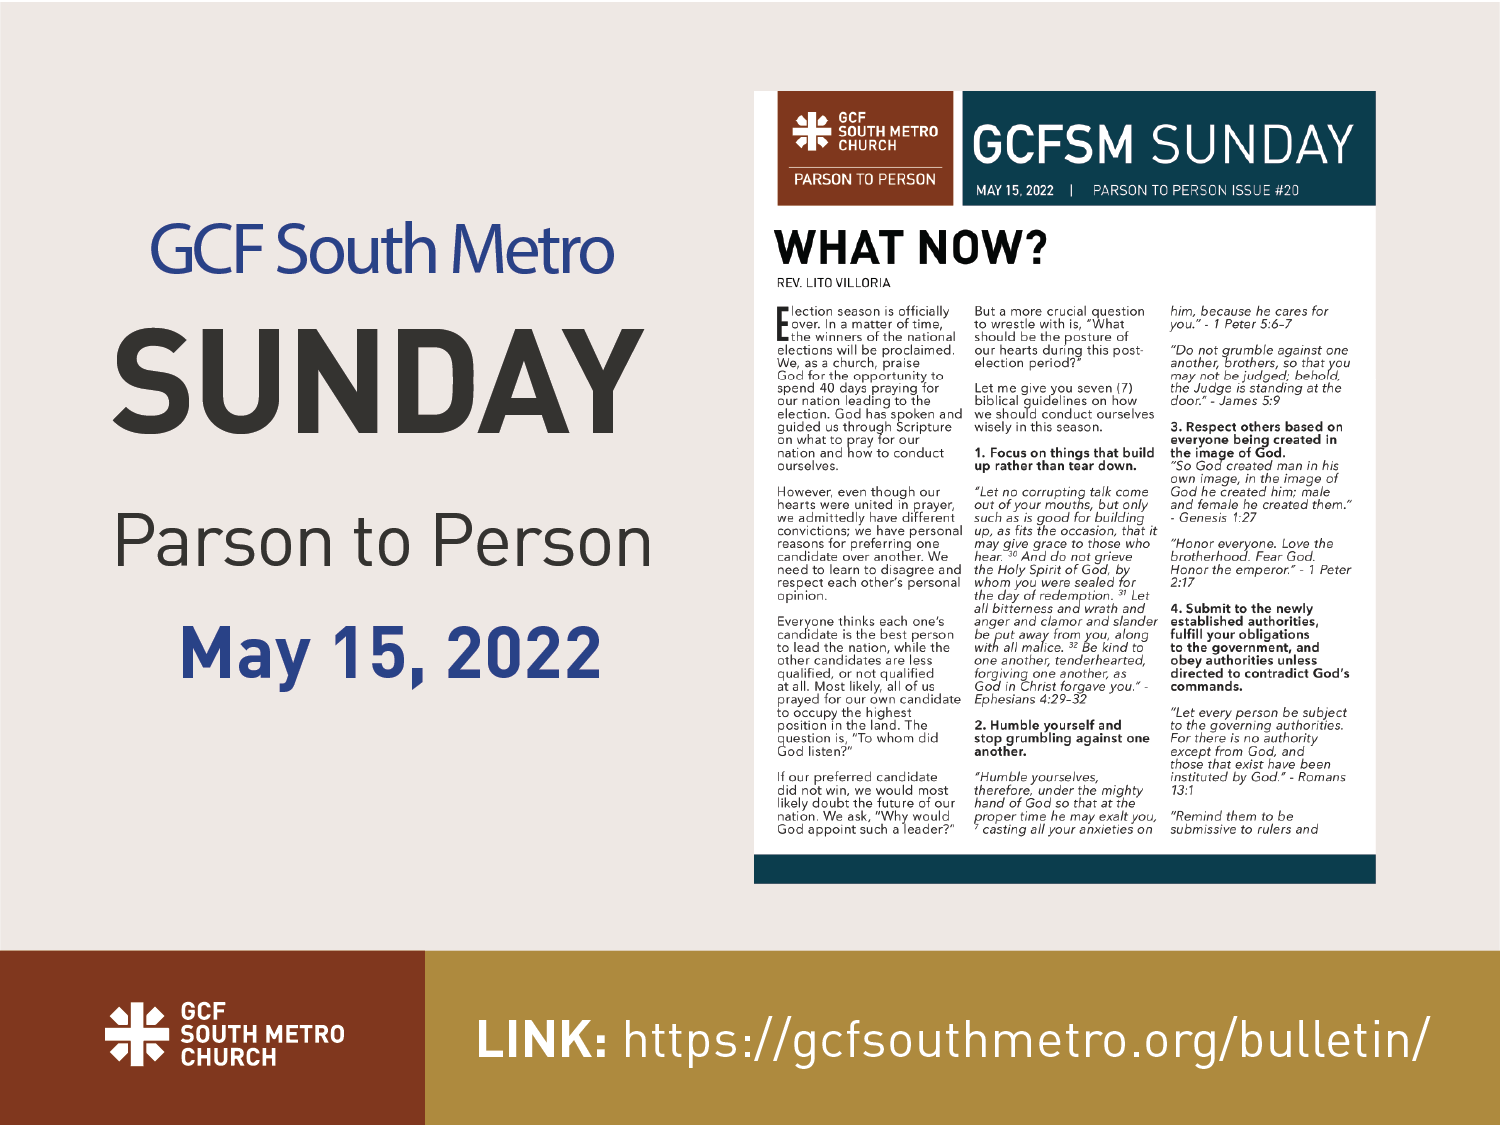 Sunday Bulletin – Parson to Person, May 15, 2022